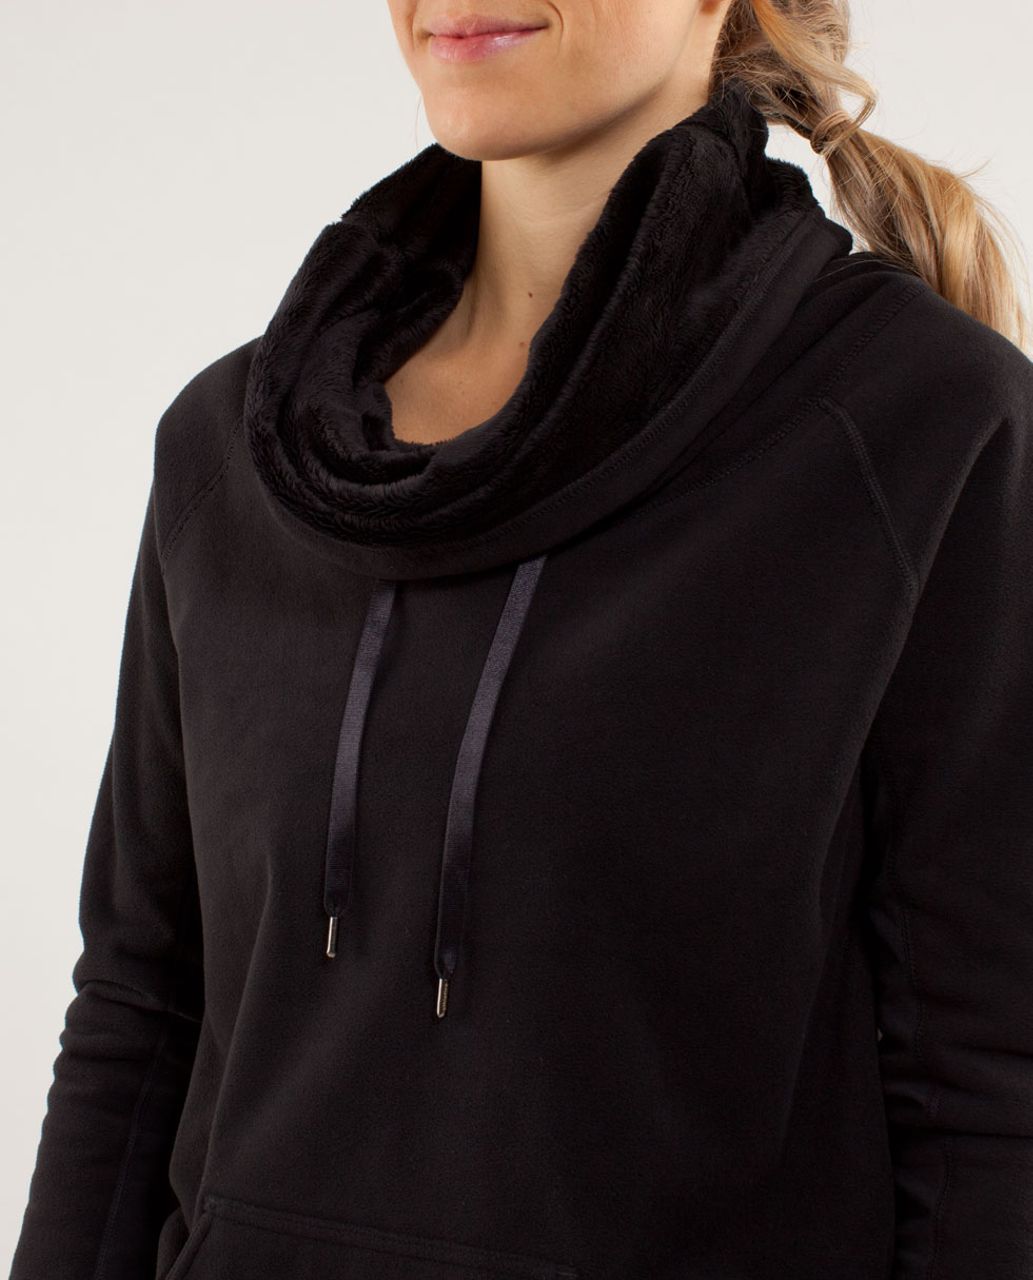 Lululemon Don't Hurry Be Happy Pullover - Black